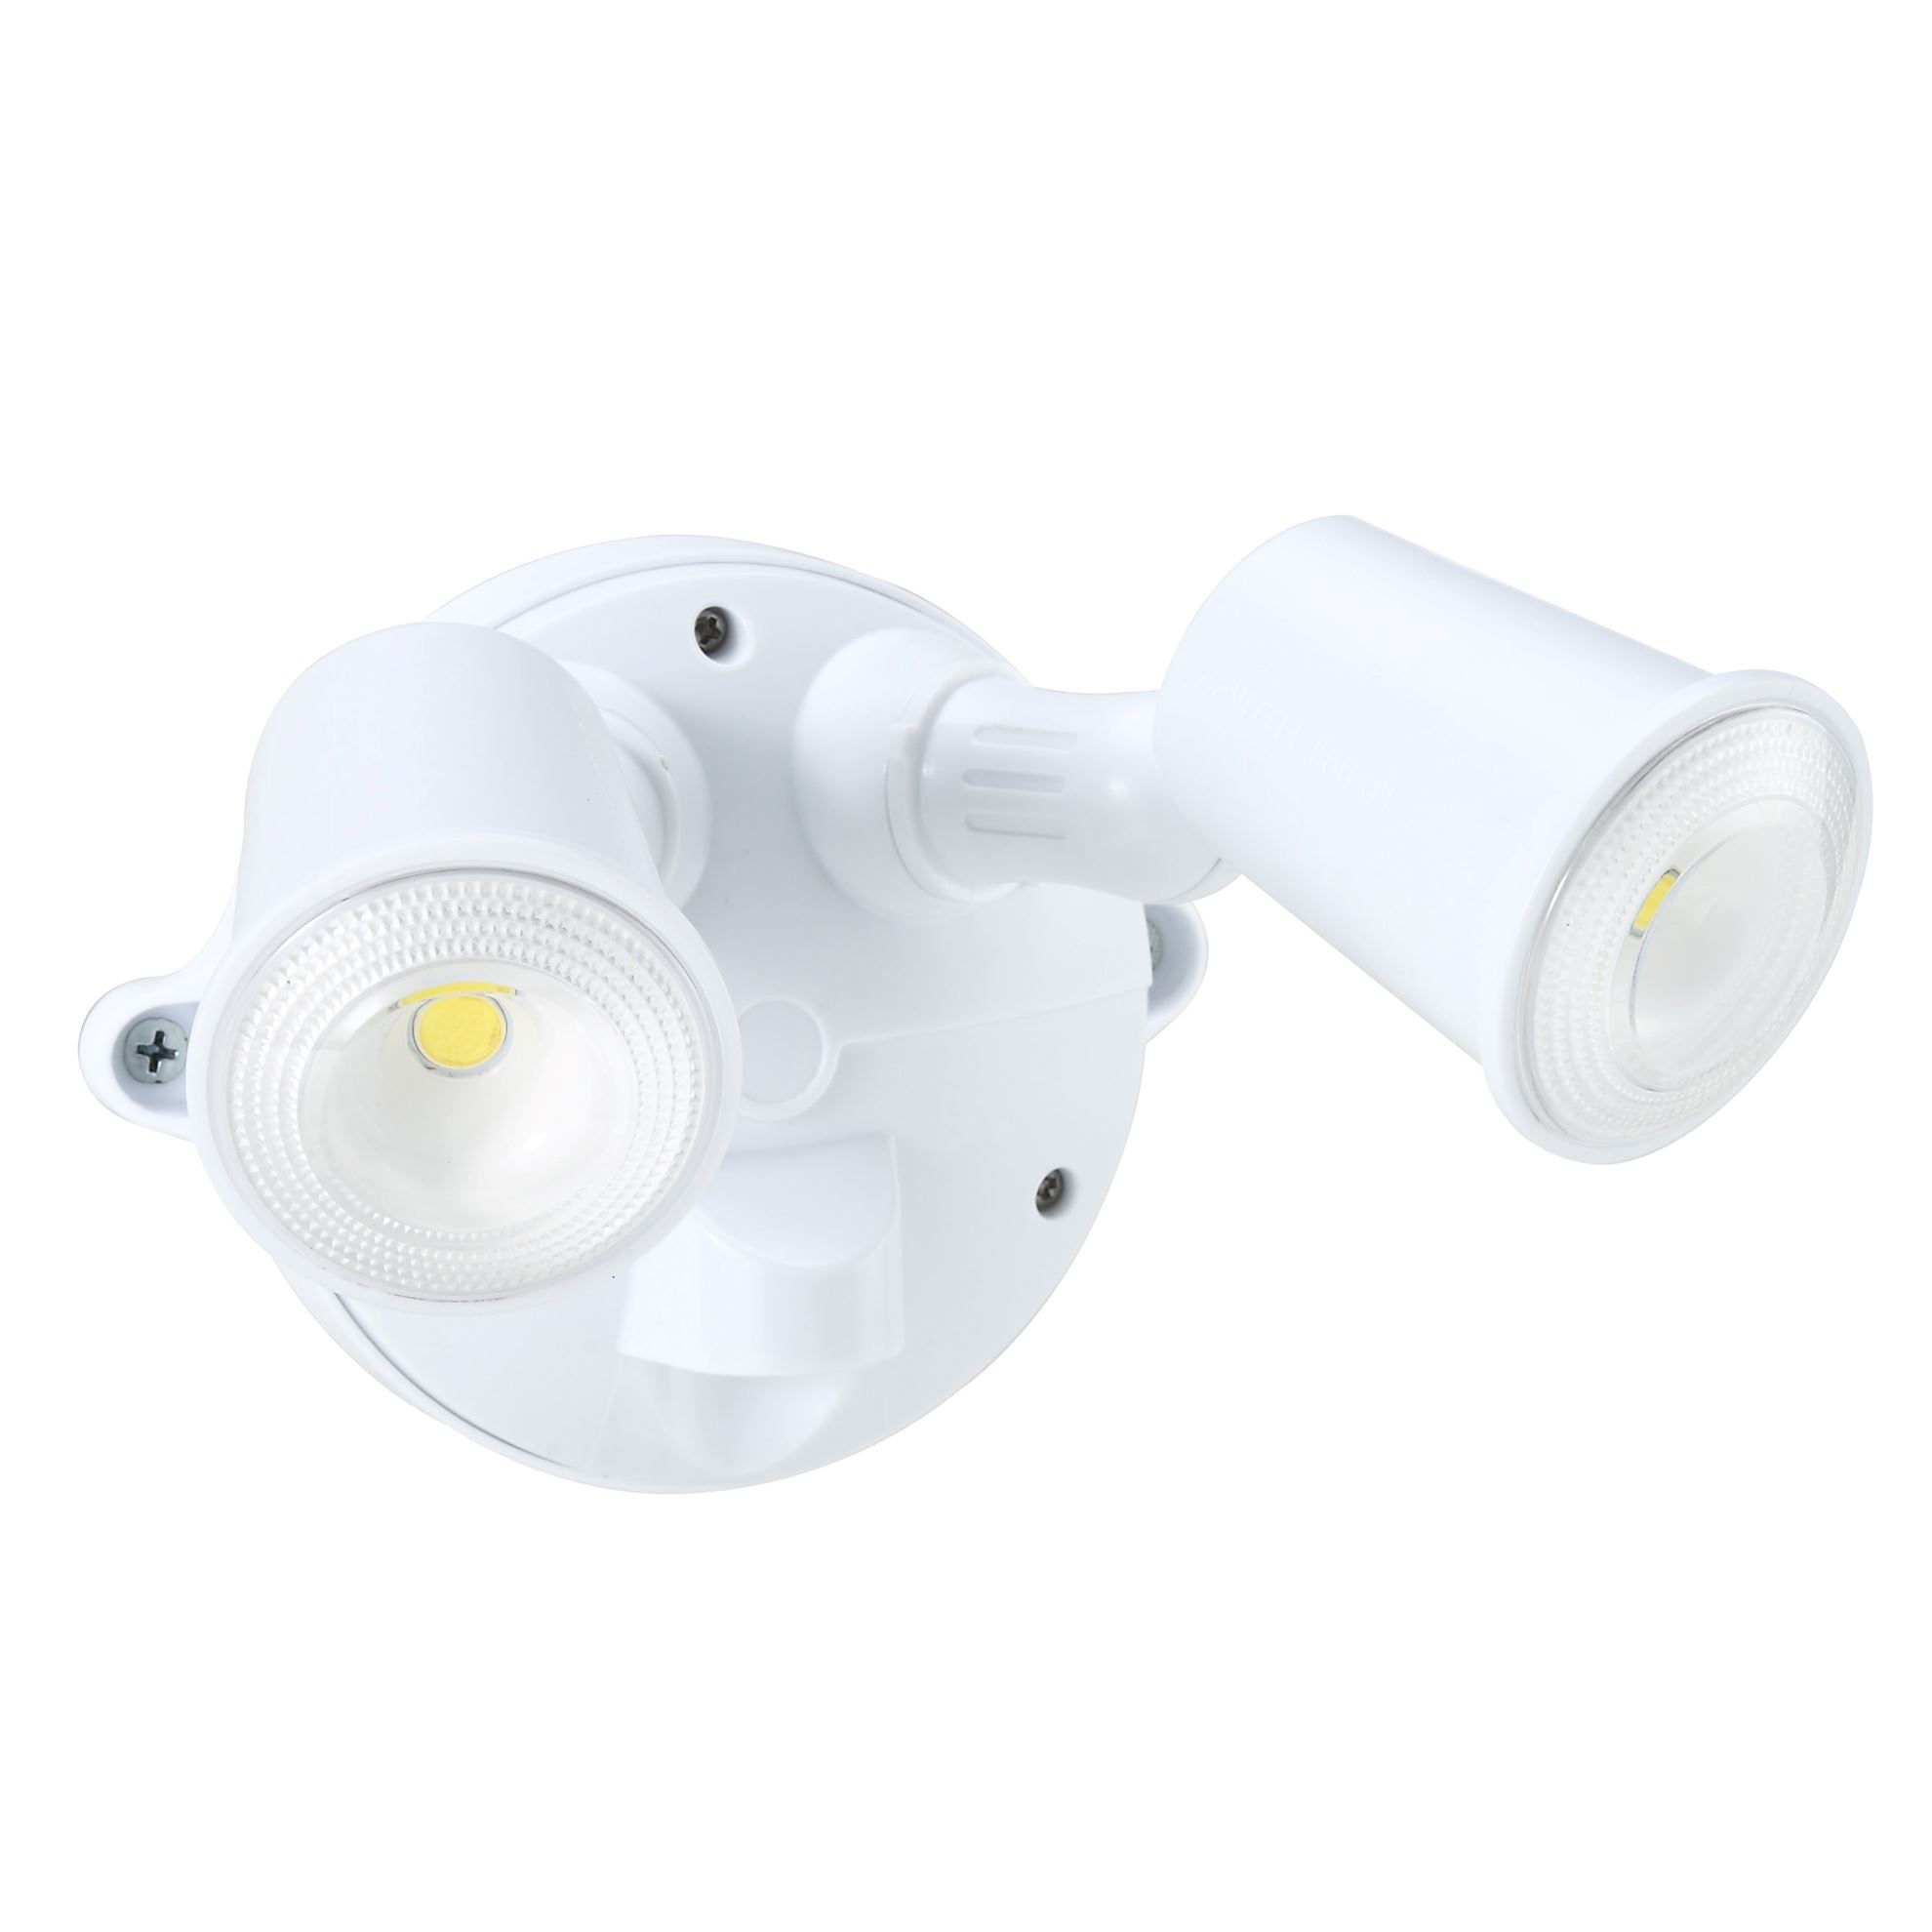 HOUSEWATCH_10W_Twin_LED_Spotlight_IP54,_2000_Lumens,Stainless_Steel_Screws,_White_Color.